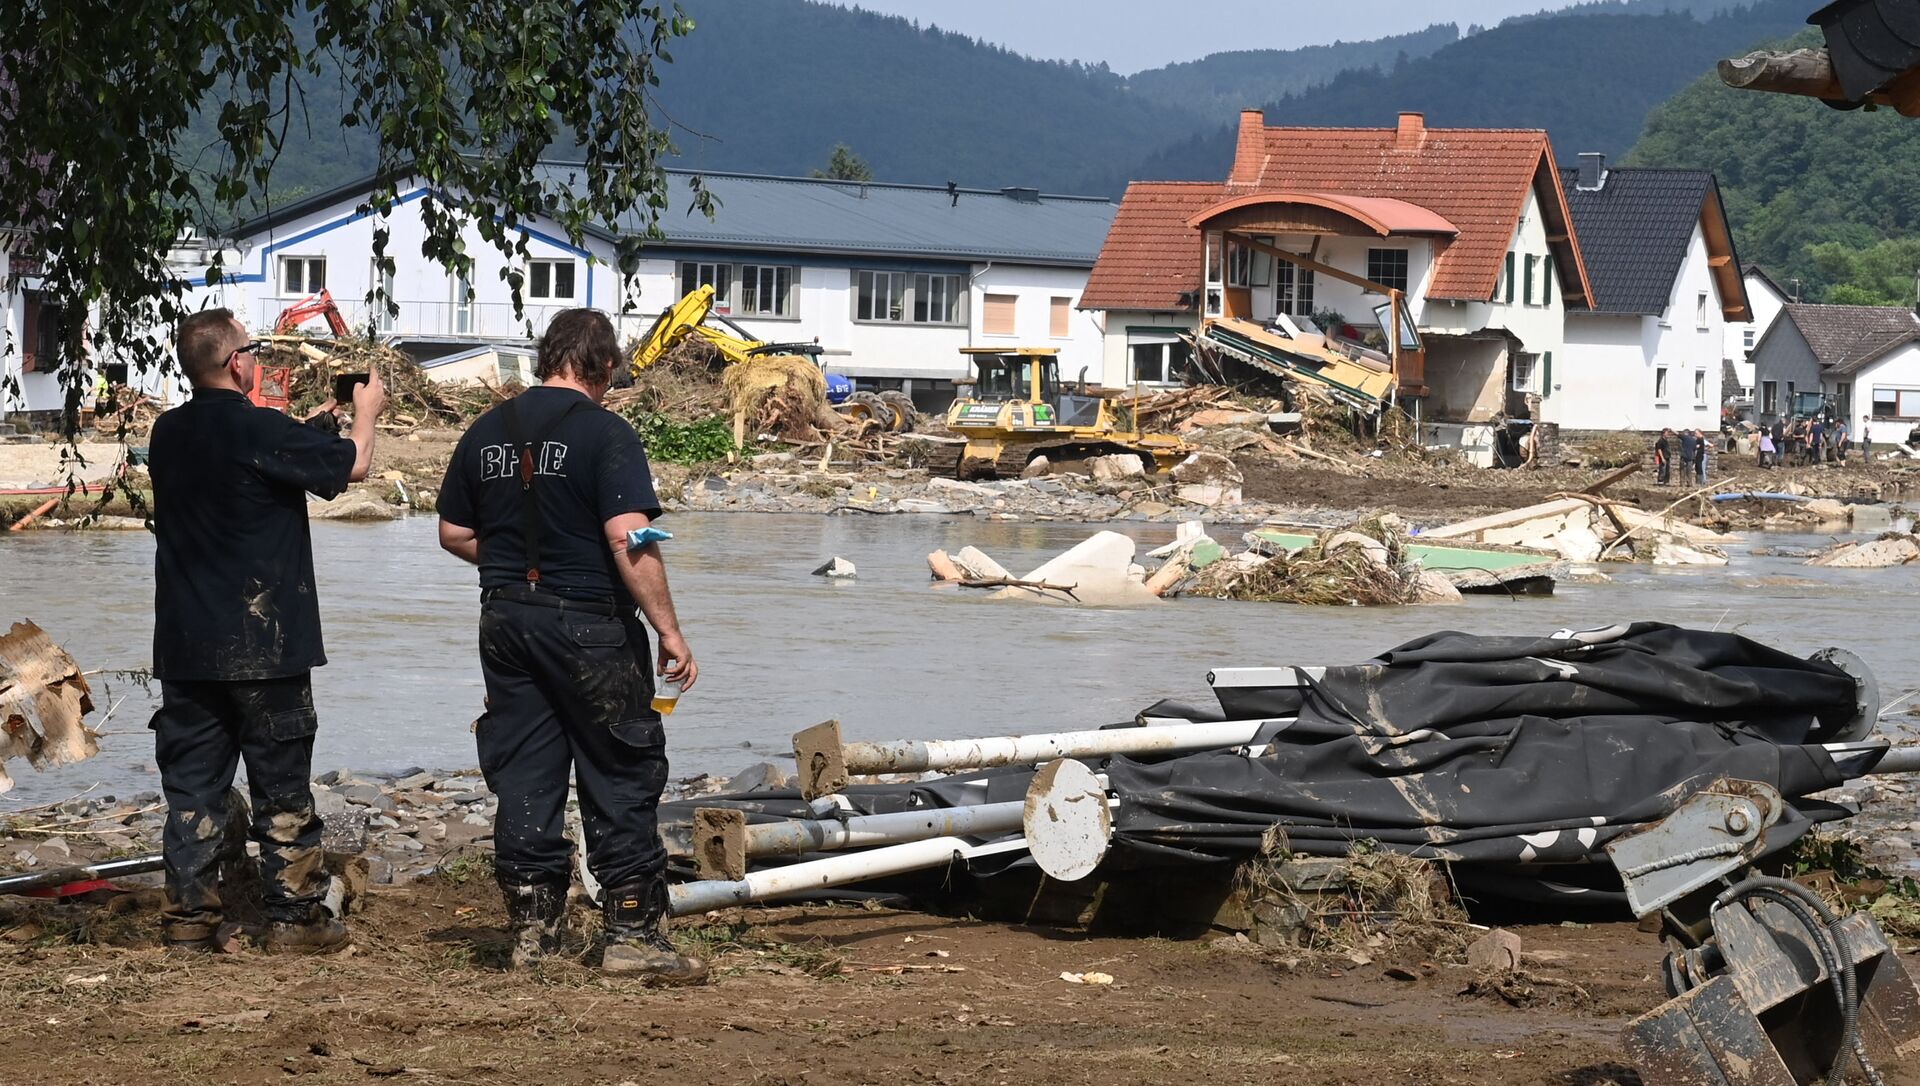 A worker (L) takes a picture of a destroyed area in Insul near Bad Neuenahr-Ahrweiler, western Germany, on July 17, 2021. - Devastating floods in Germany and other parts of western Europe have been described as a catastrophe, a war zone and unprecedented, with more than 150 people dead and the toll still climbing on July 17, 2021 - Sputnik International, 1920, 28.07.2021